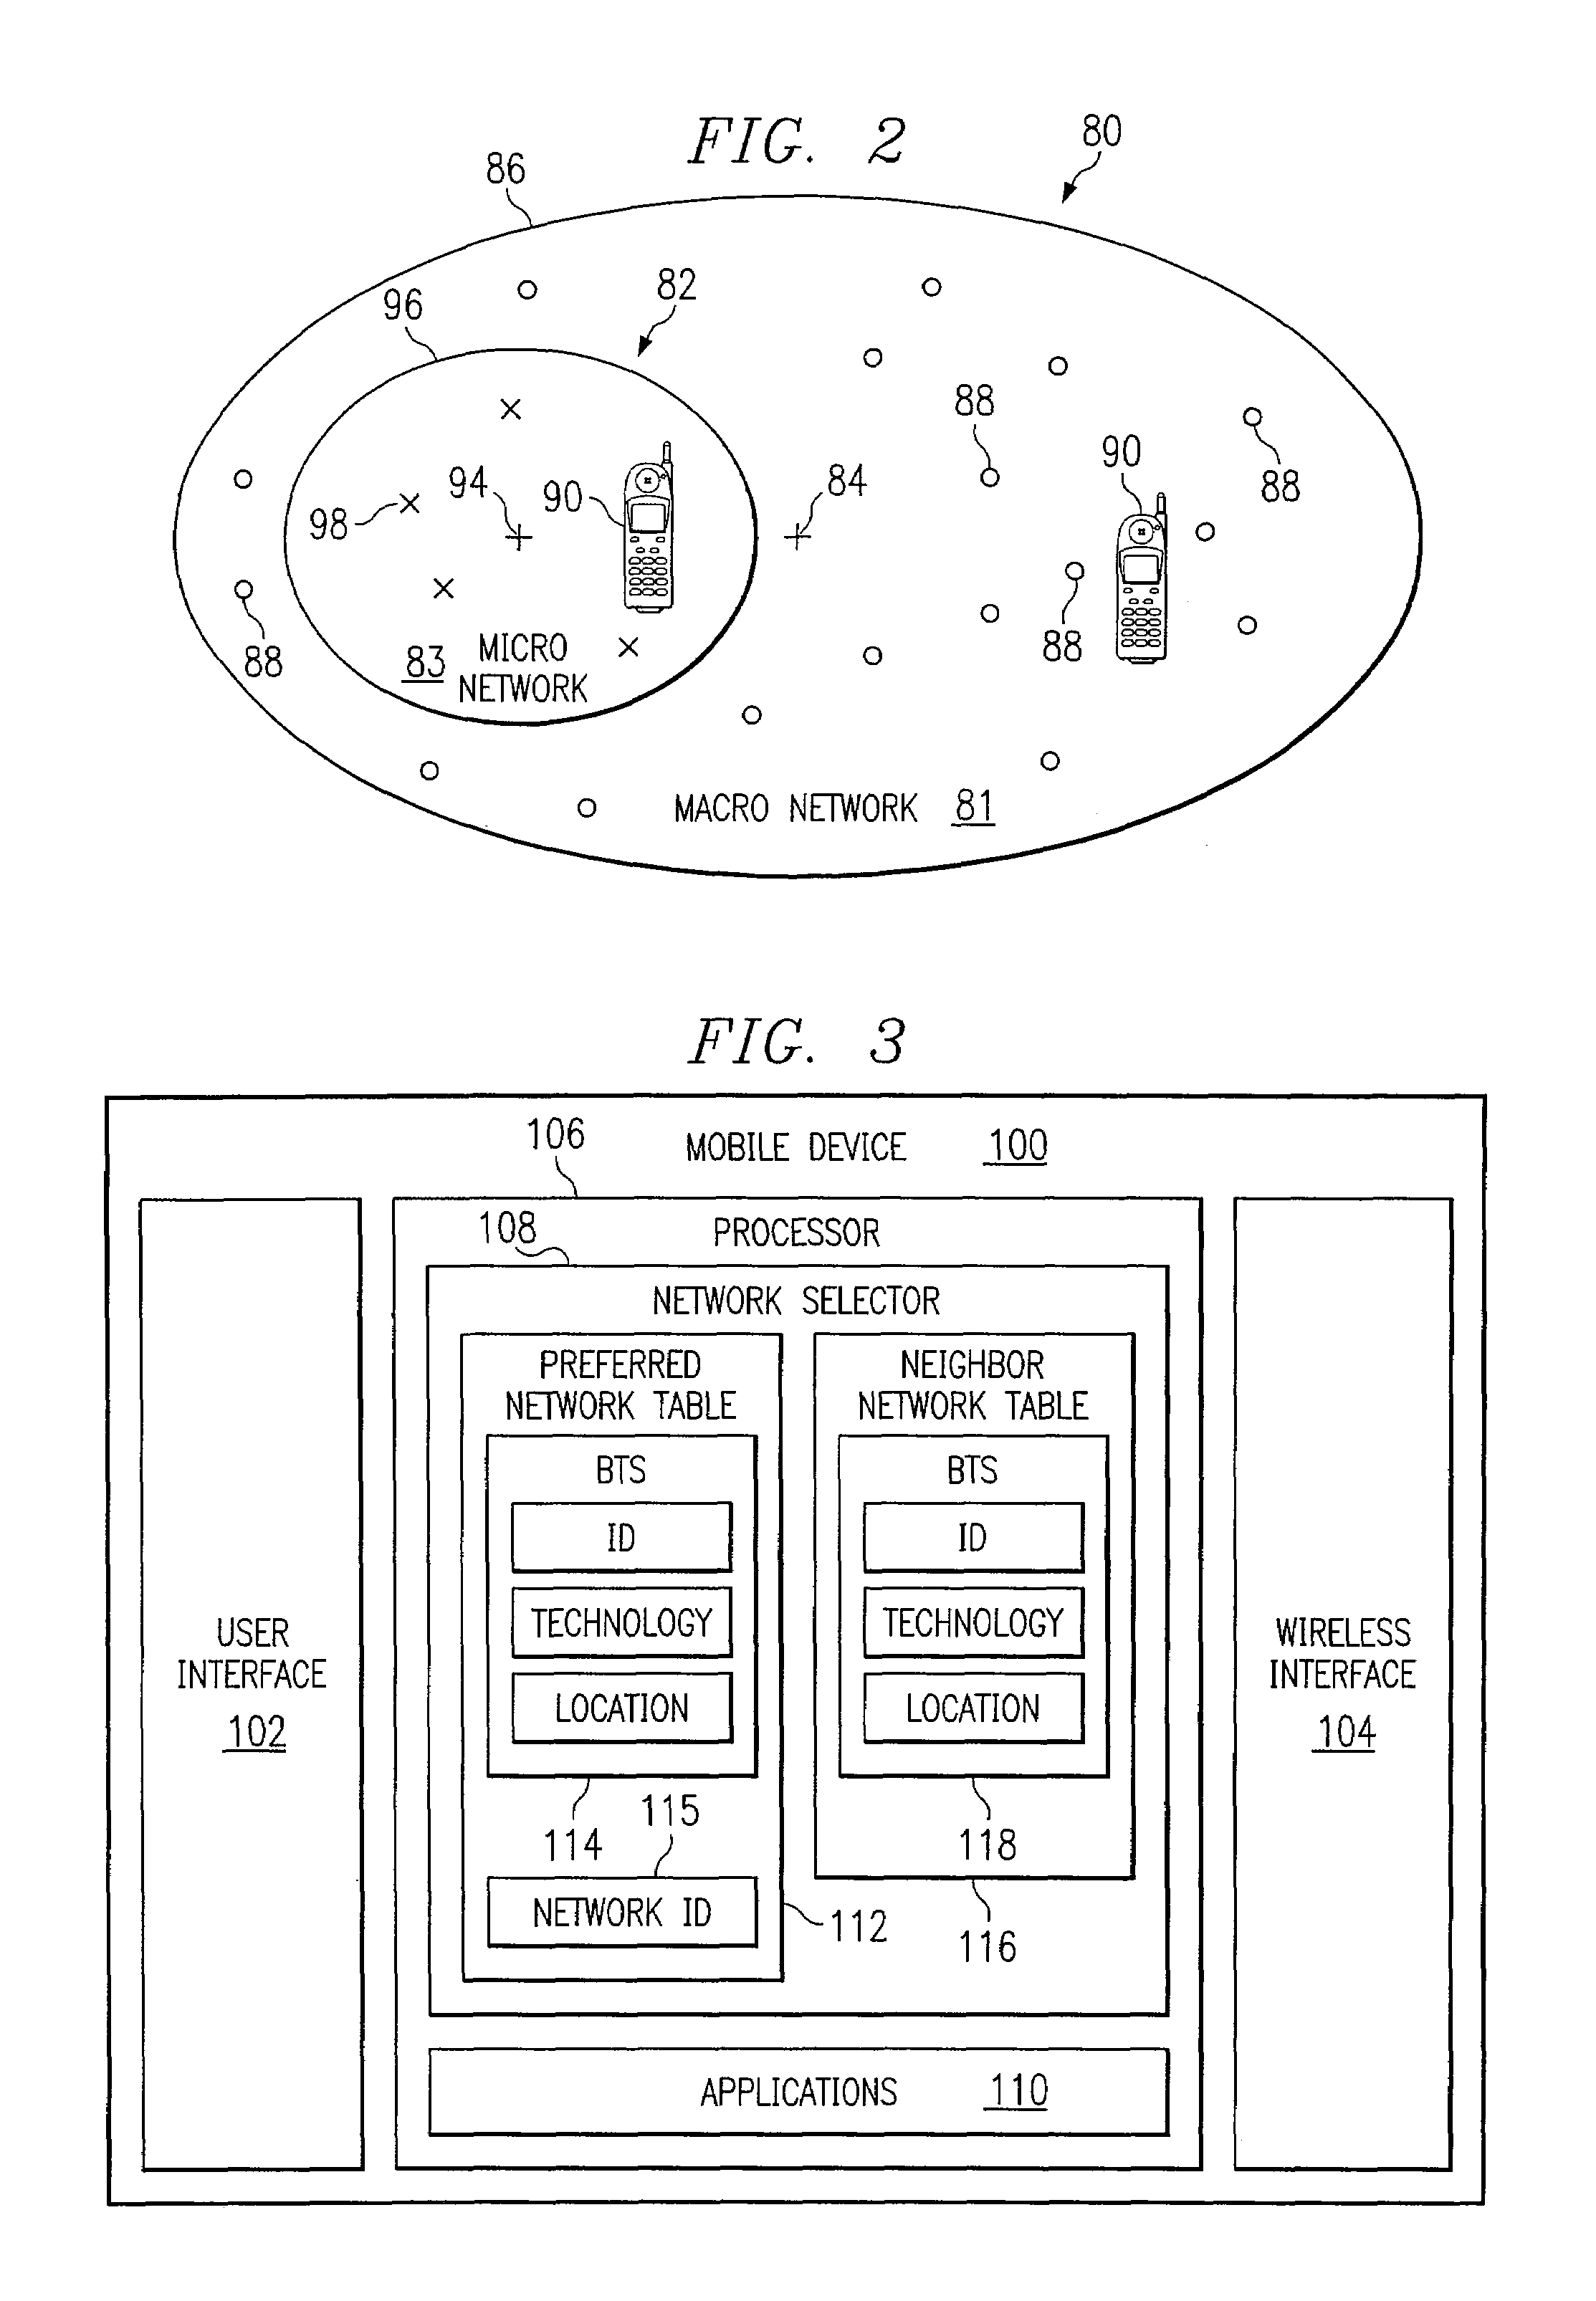 Method and system for detecting a preferred wireless network for a mobile device